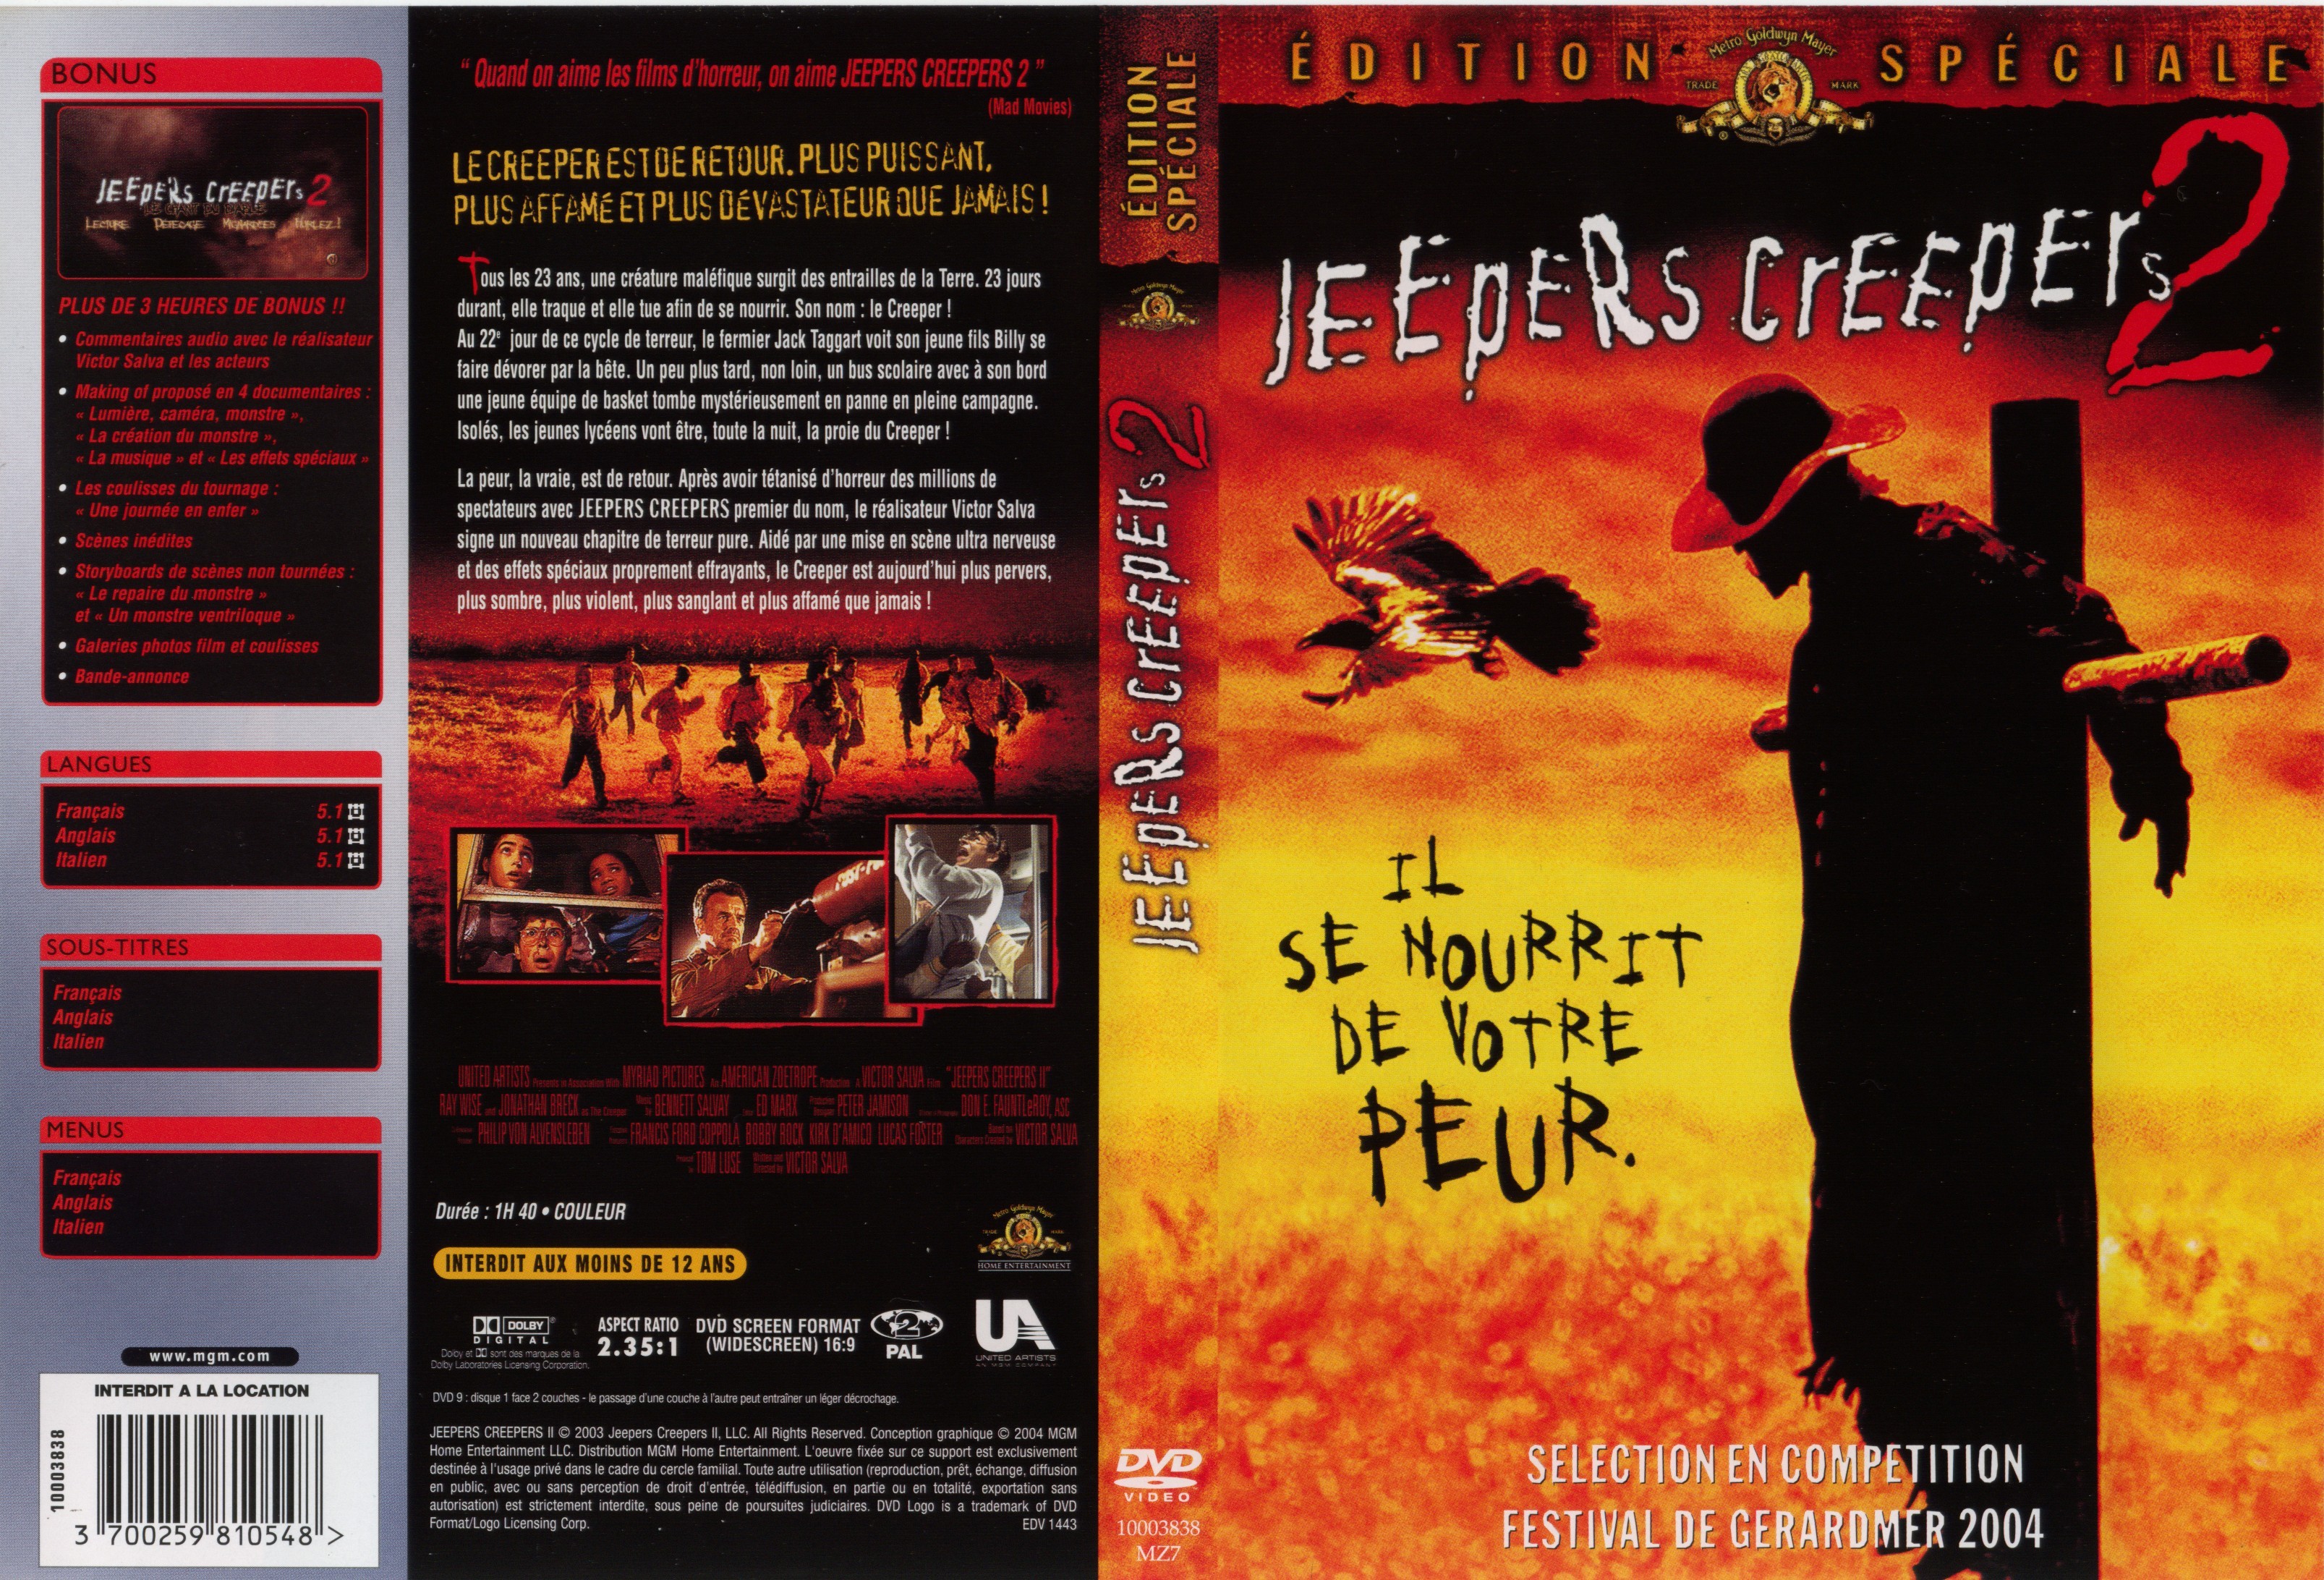 Jaquette DVD Jeepers creepers 2 v2